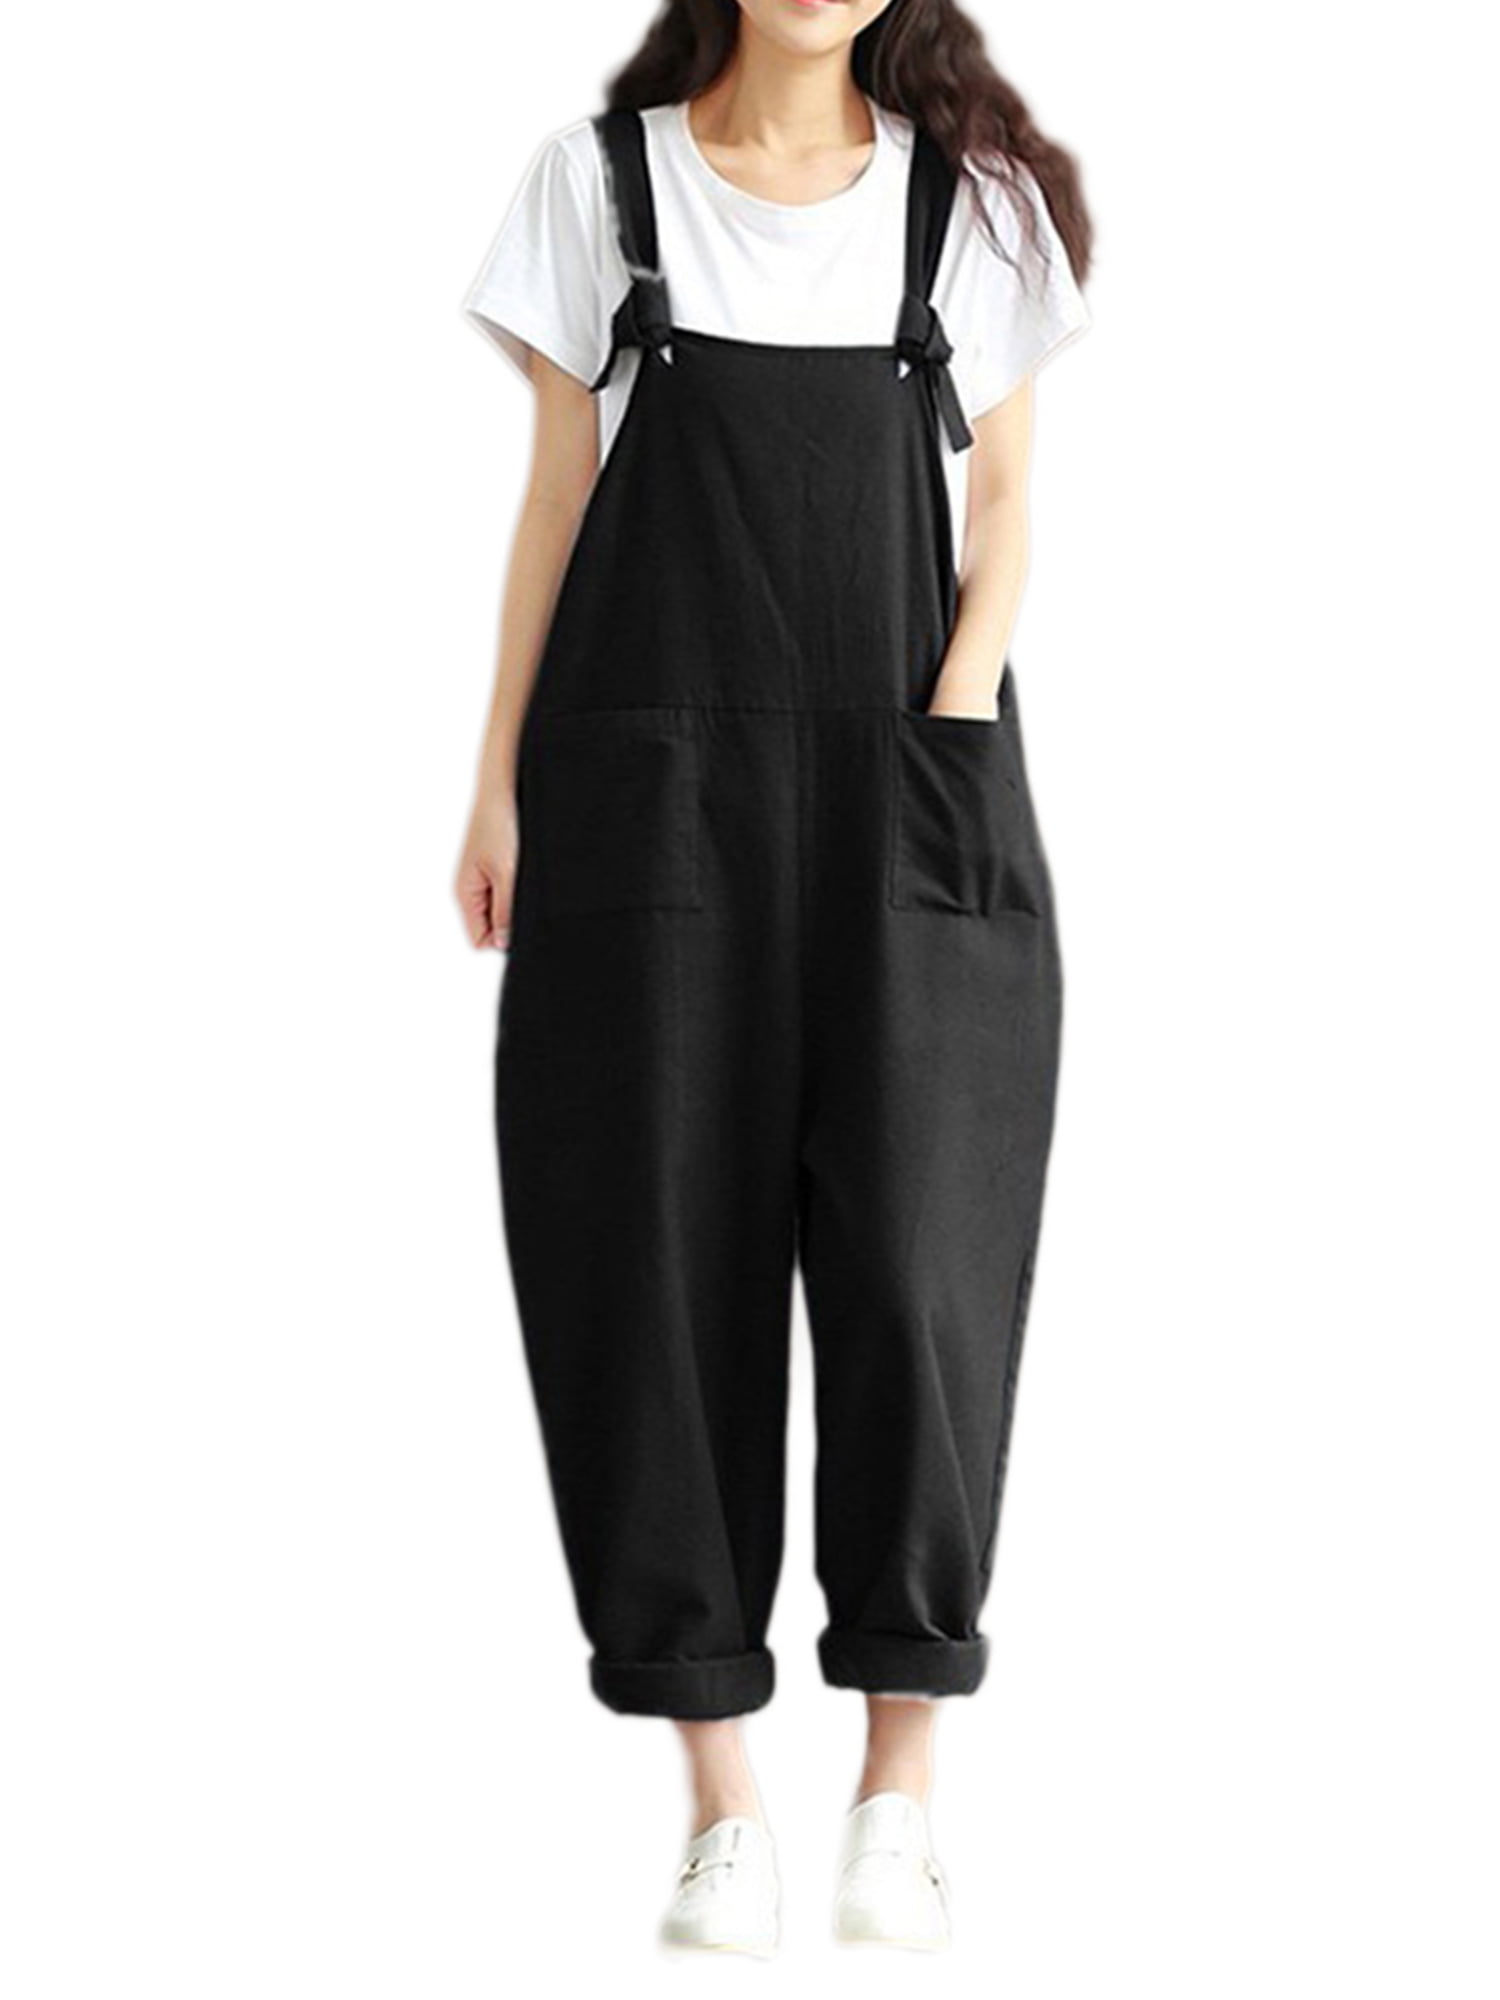 Women’s Strap Button Loose Jumpsuit Casual Dungaree Harem Girls Overall Pant